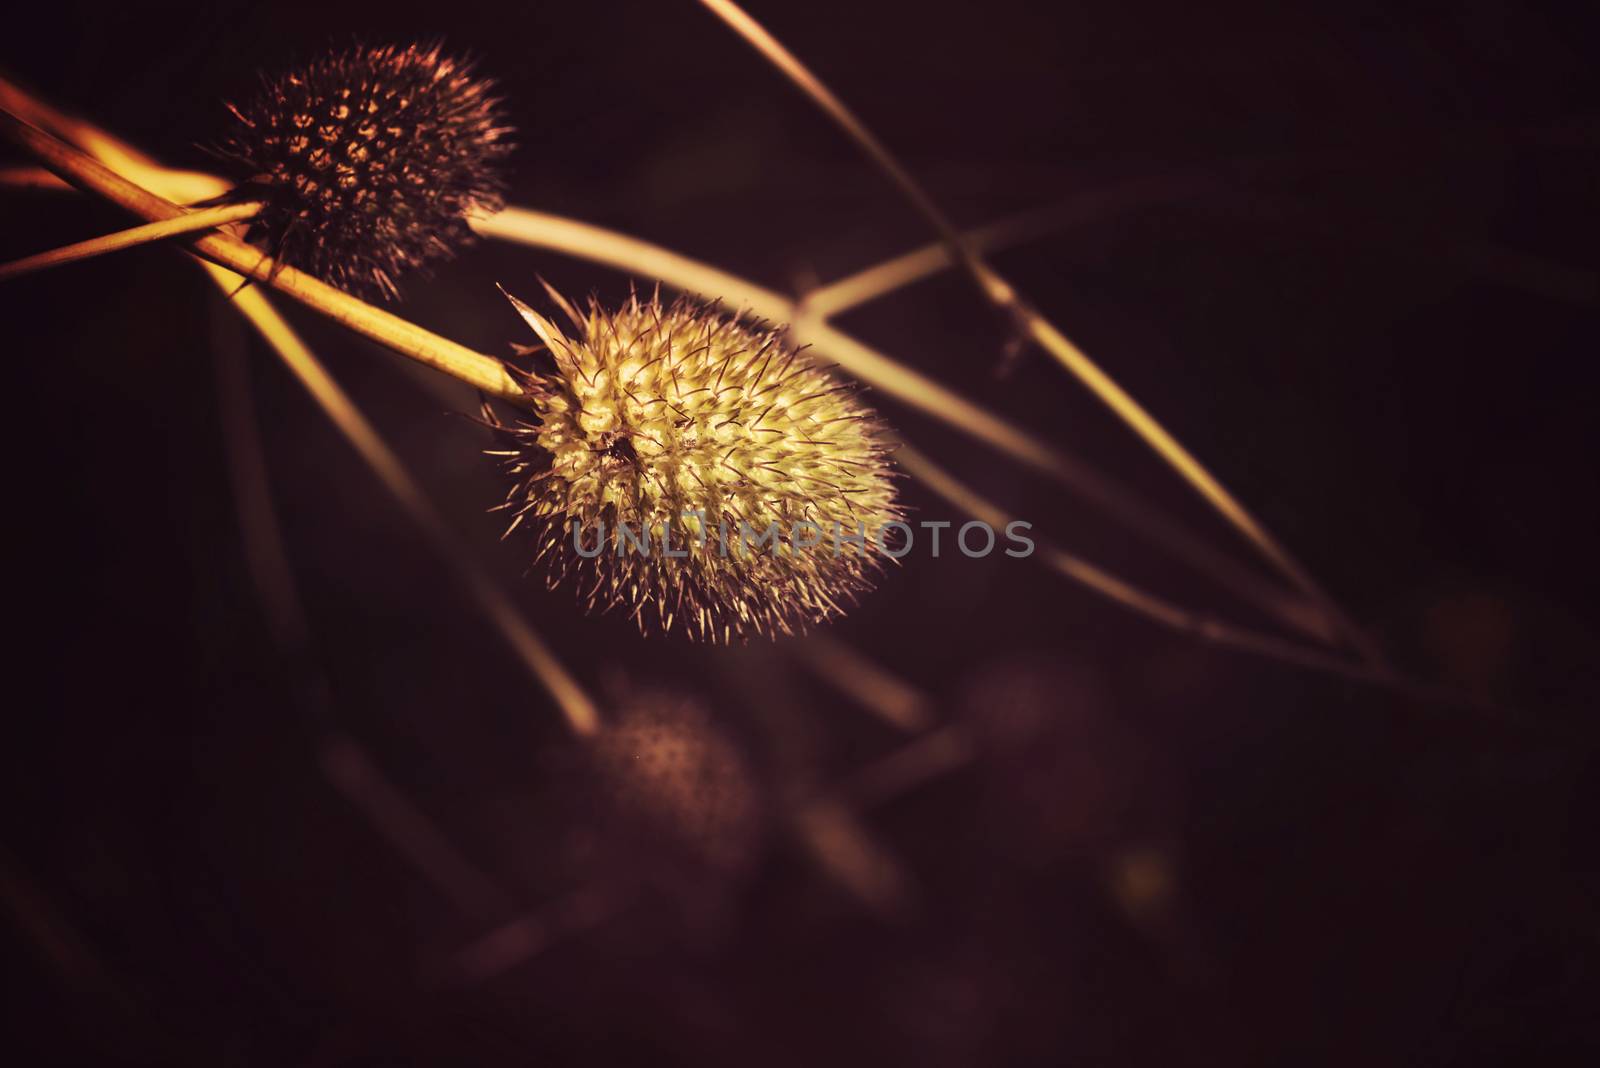 Dry flower elements with vintage filter effect, nature background.